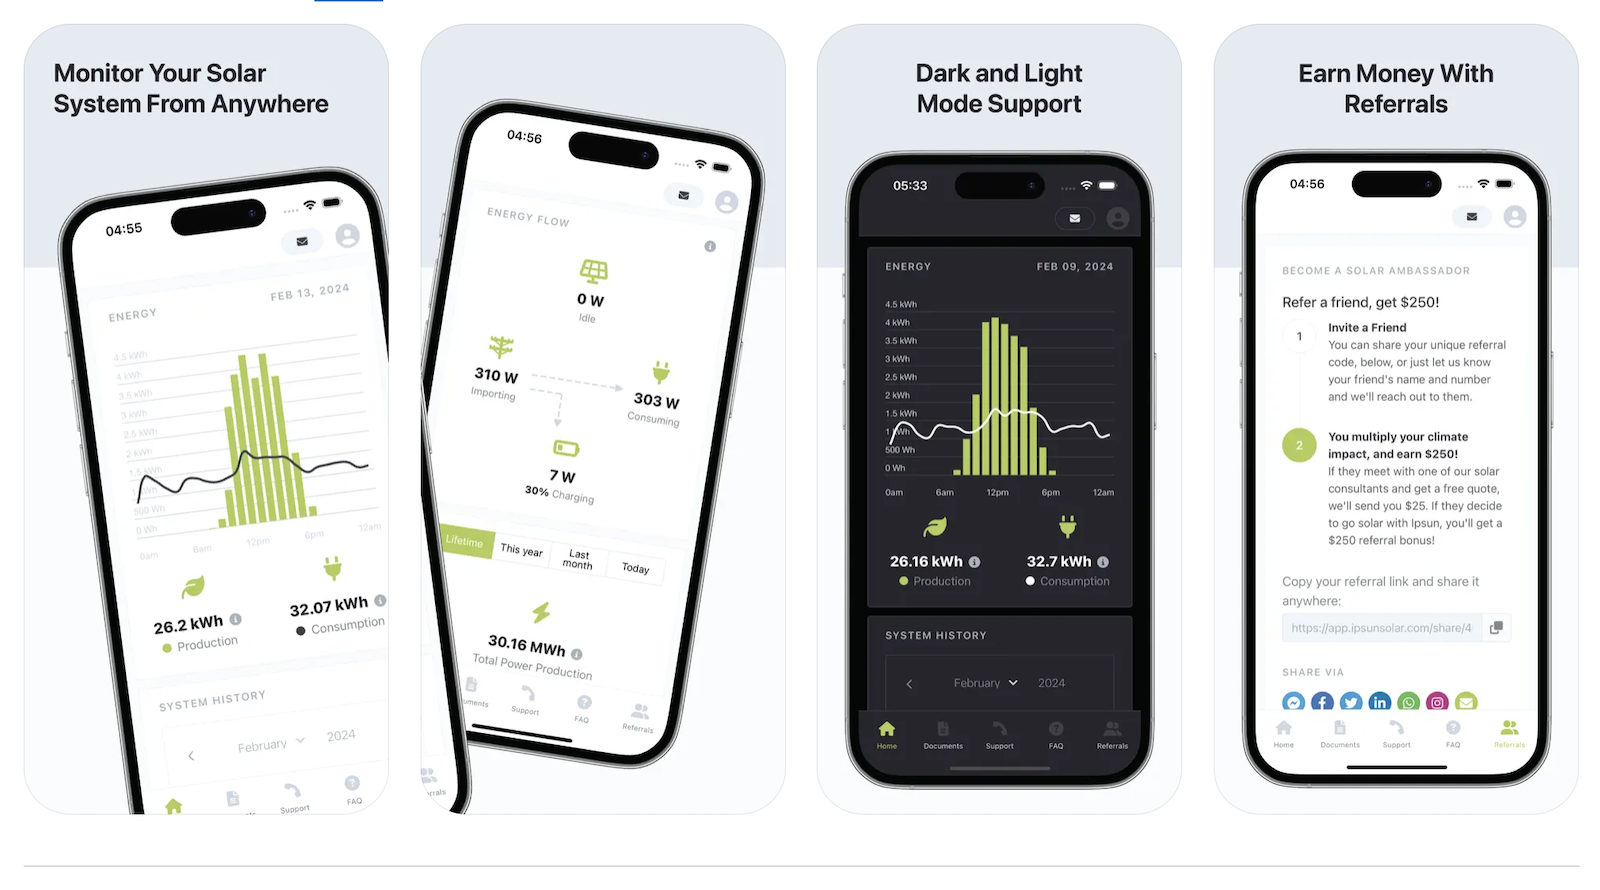 Solar Installers Can Get Their Own App From Sunvoy